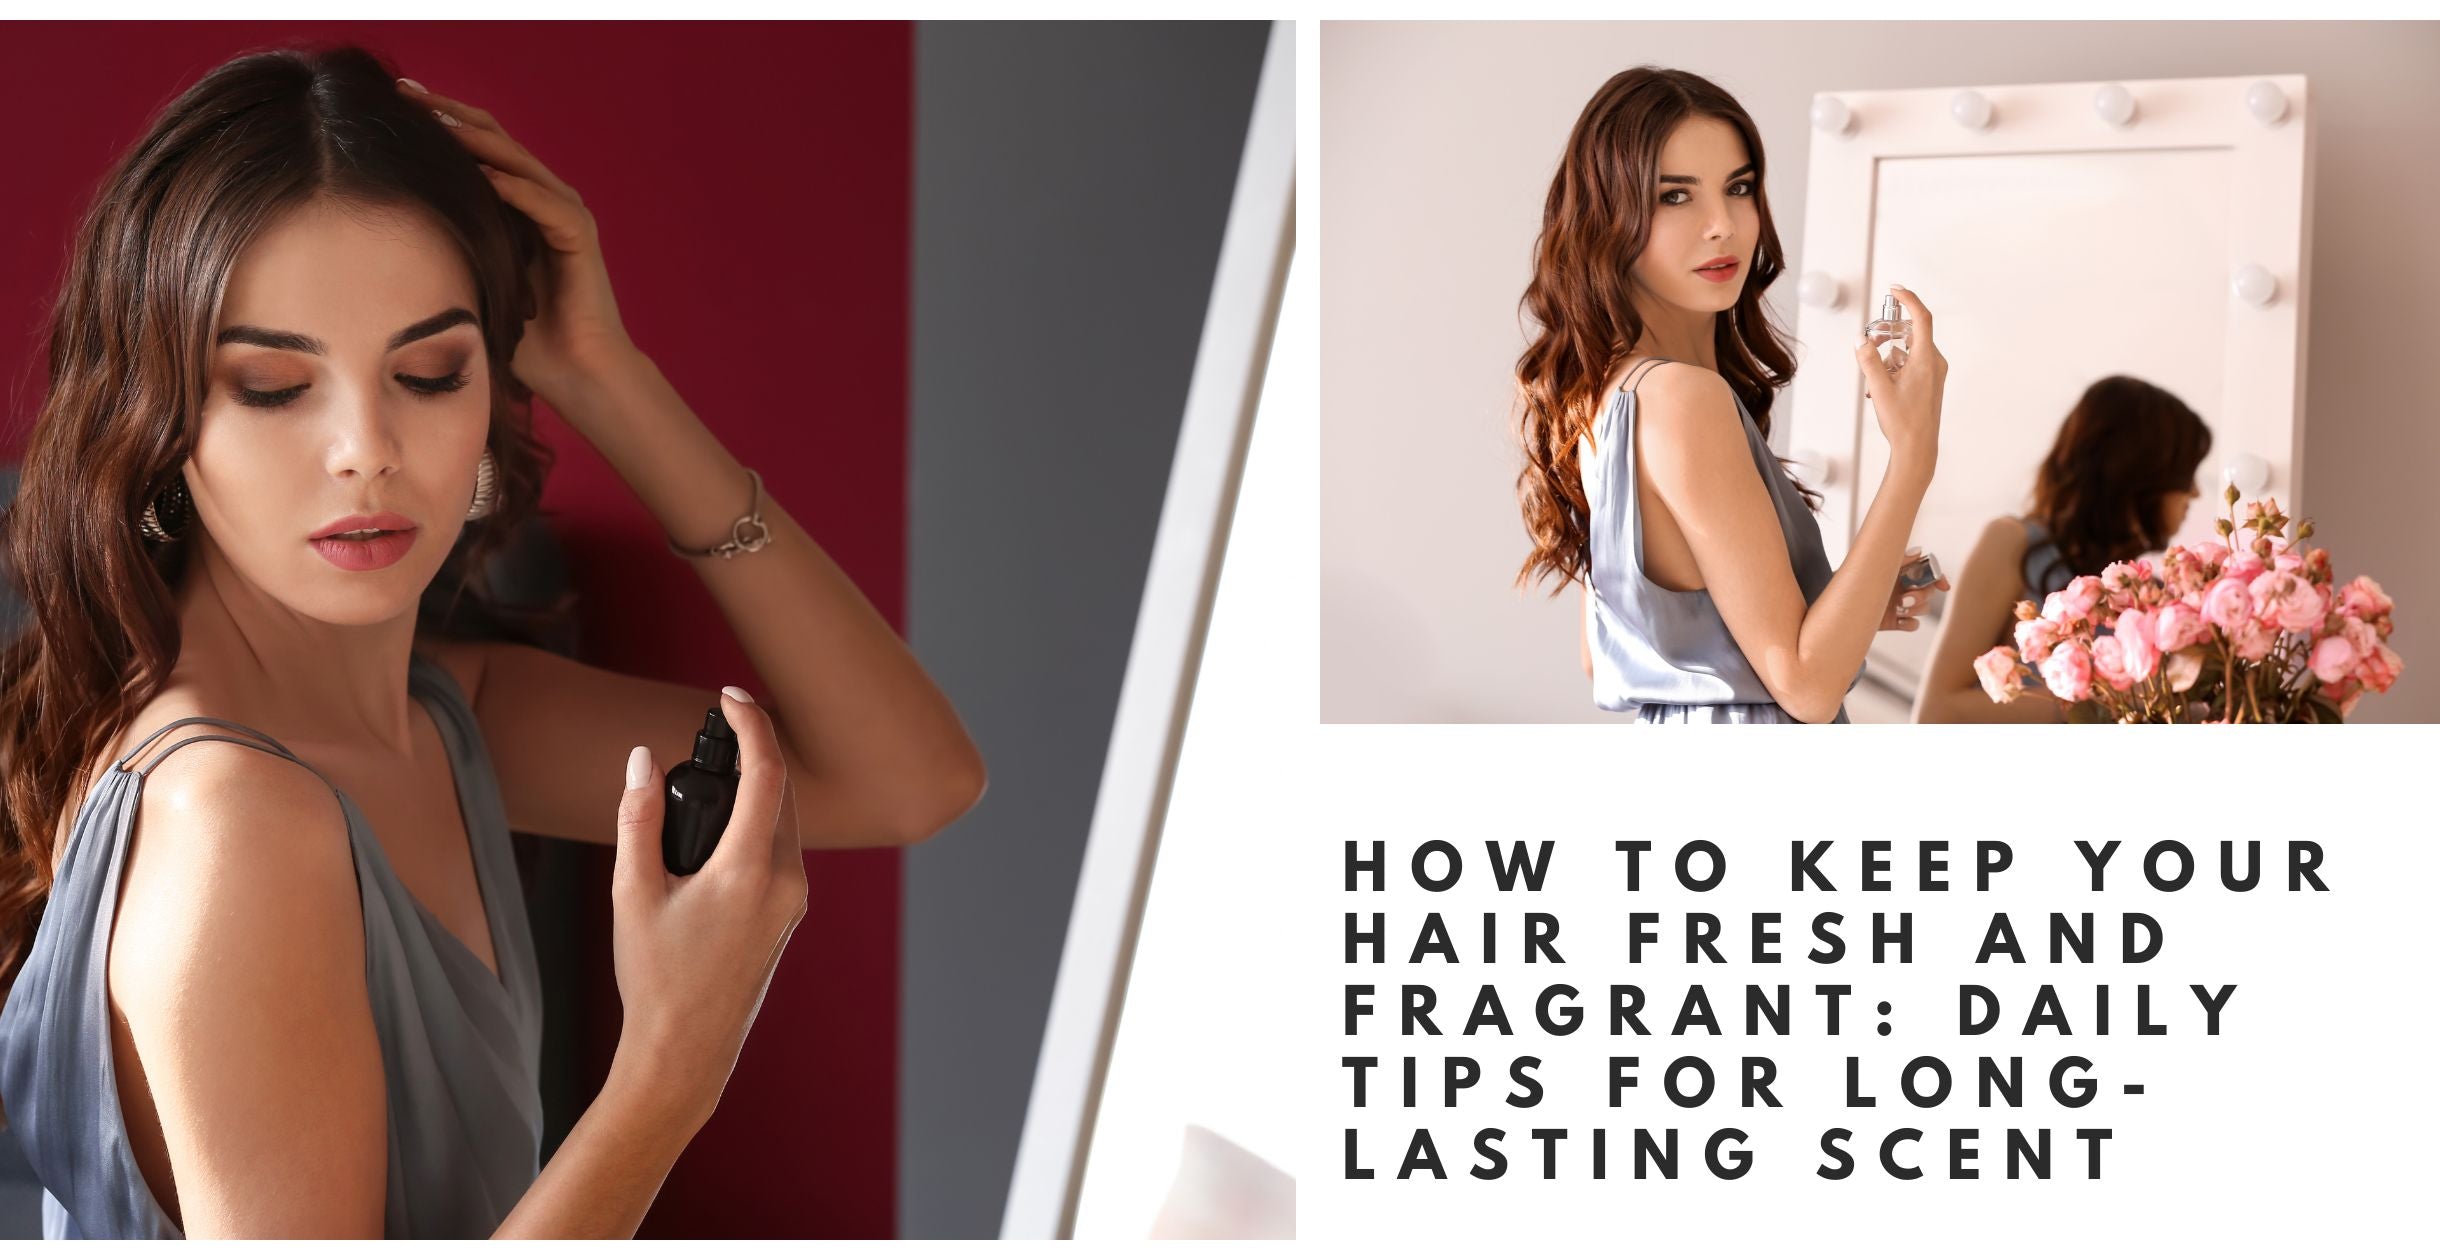 How to Keep Your Hair Fresh and Fragrant: Daily Tips for Long-Lasting Scent